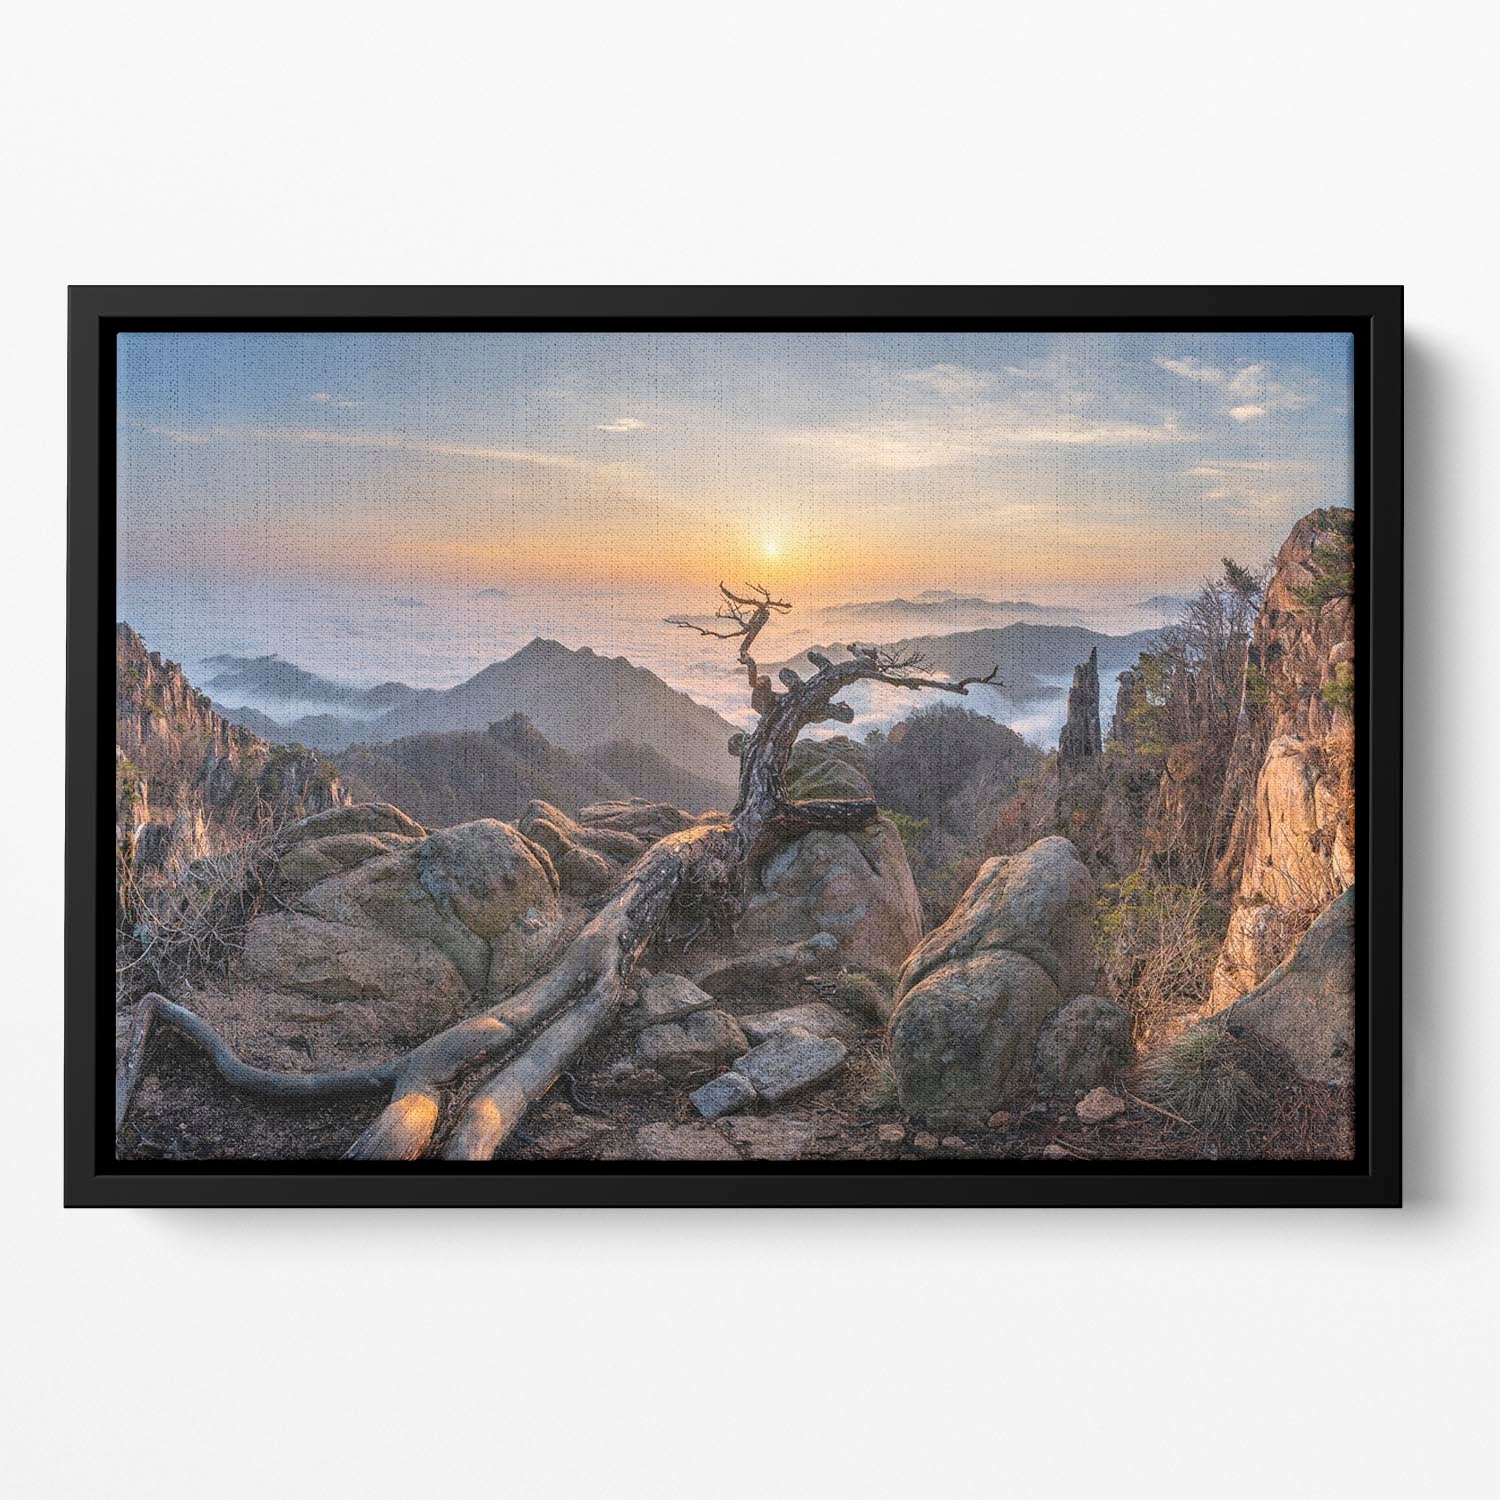 Dead pine On The Mountains Floating Framed Canvas - Canvas Art Rocks - 2